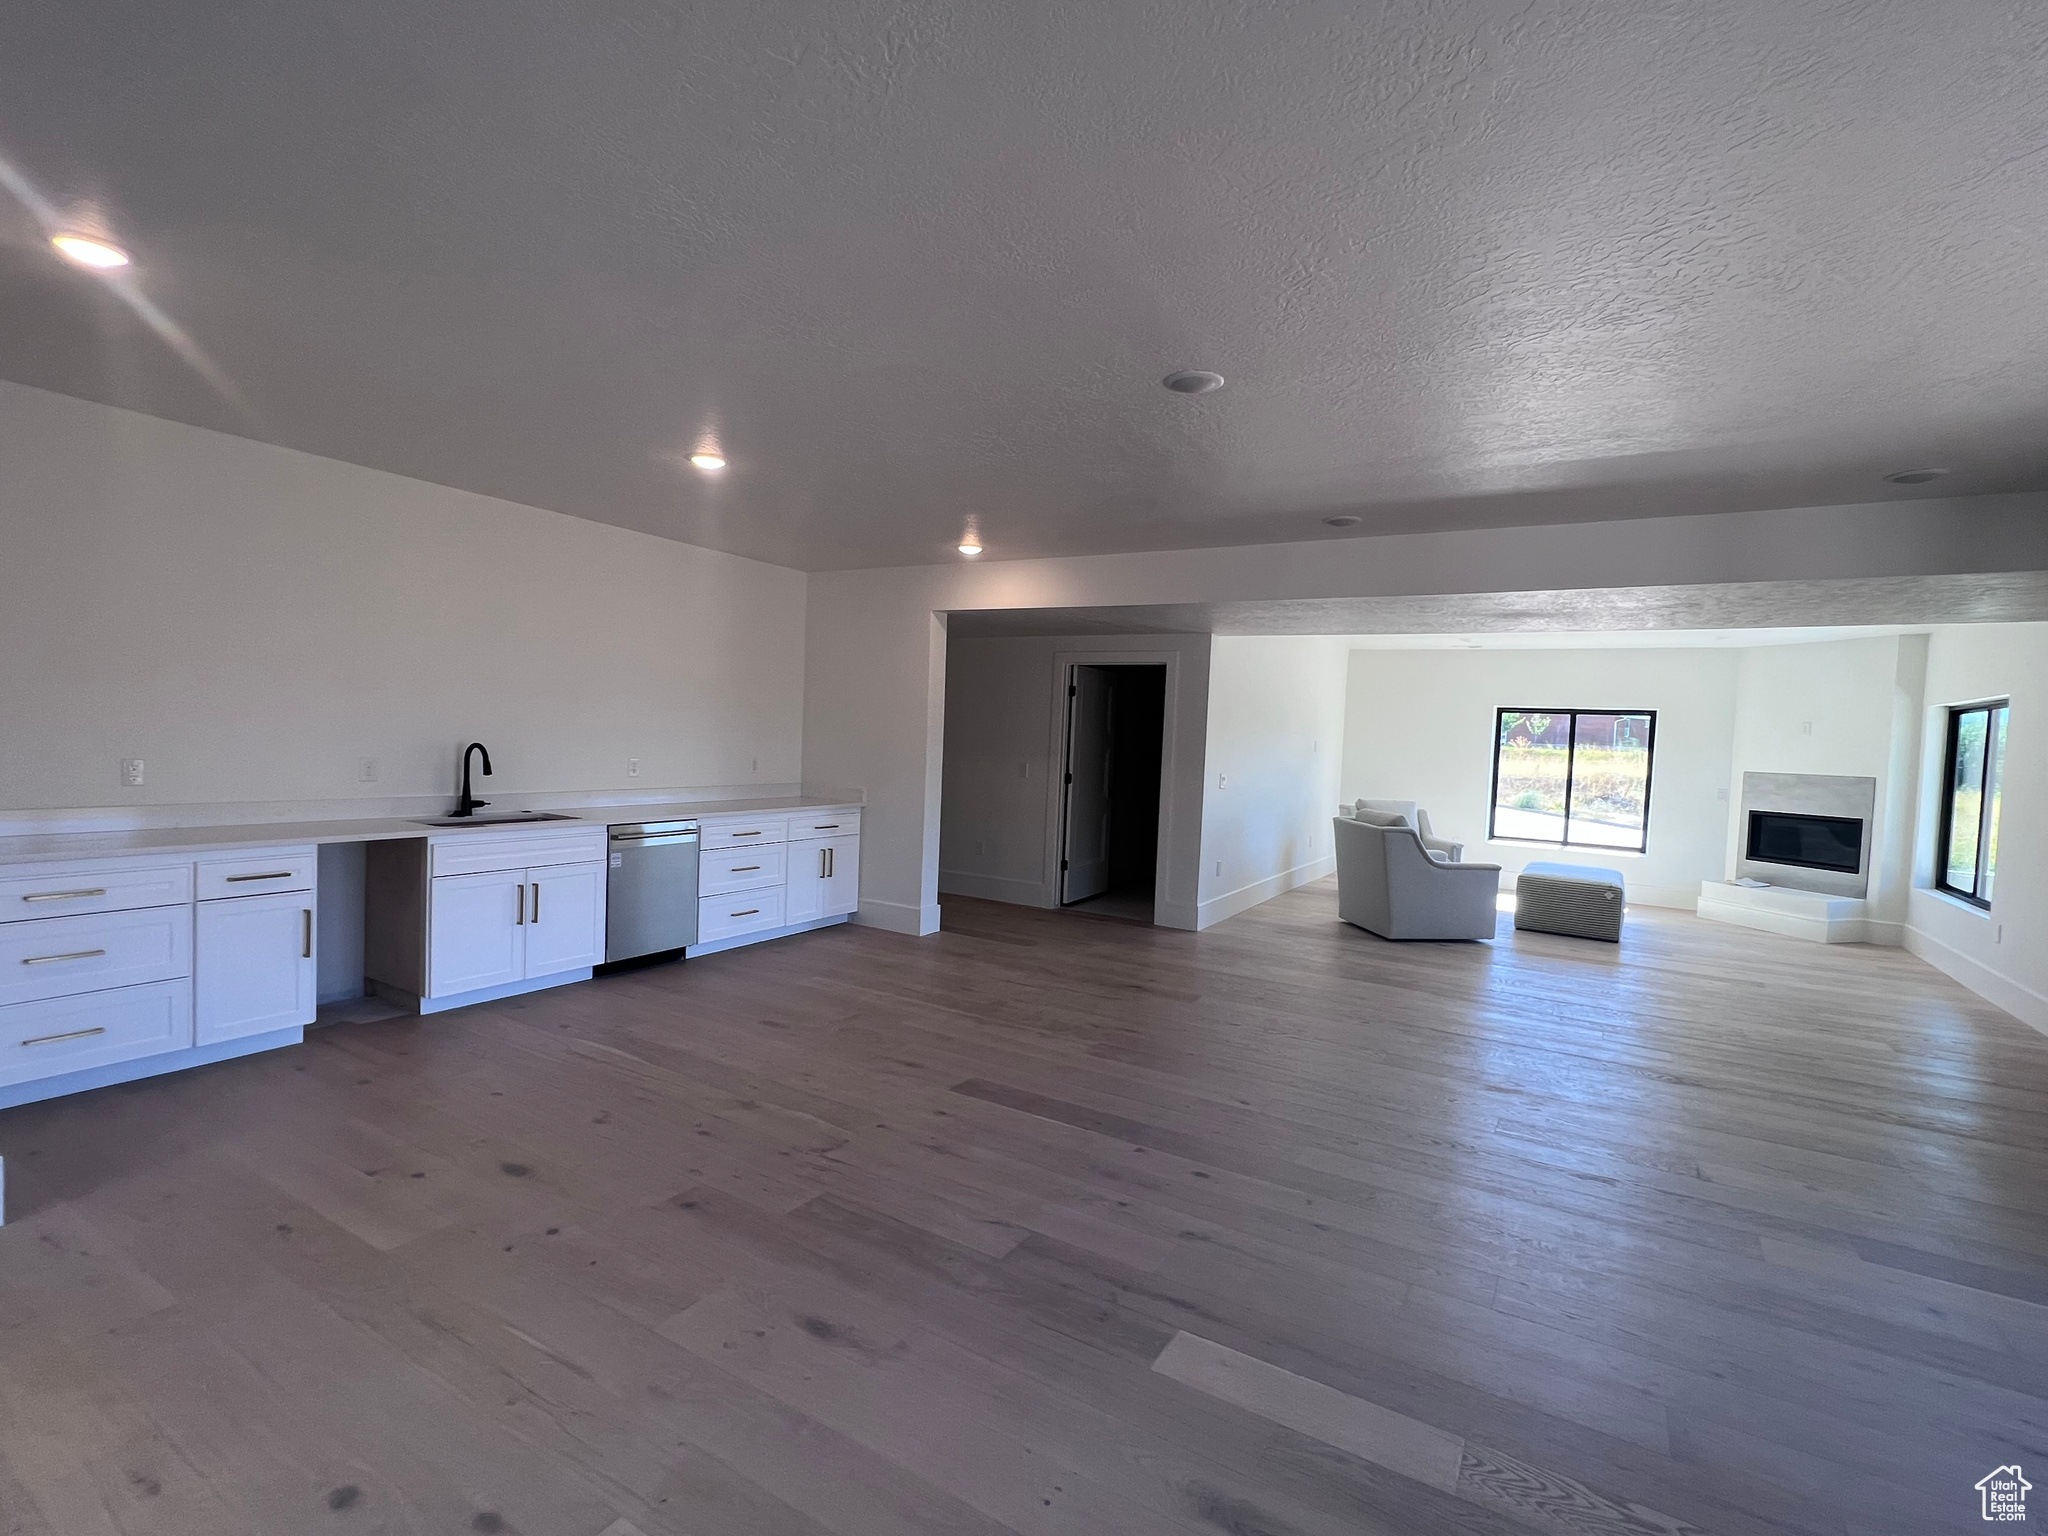 Unfurnished living room with light hardwood / wood-style flooring, a textured ceiling, and sink